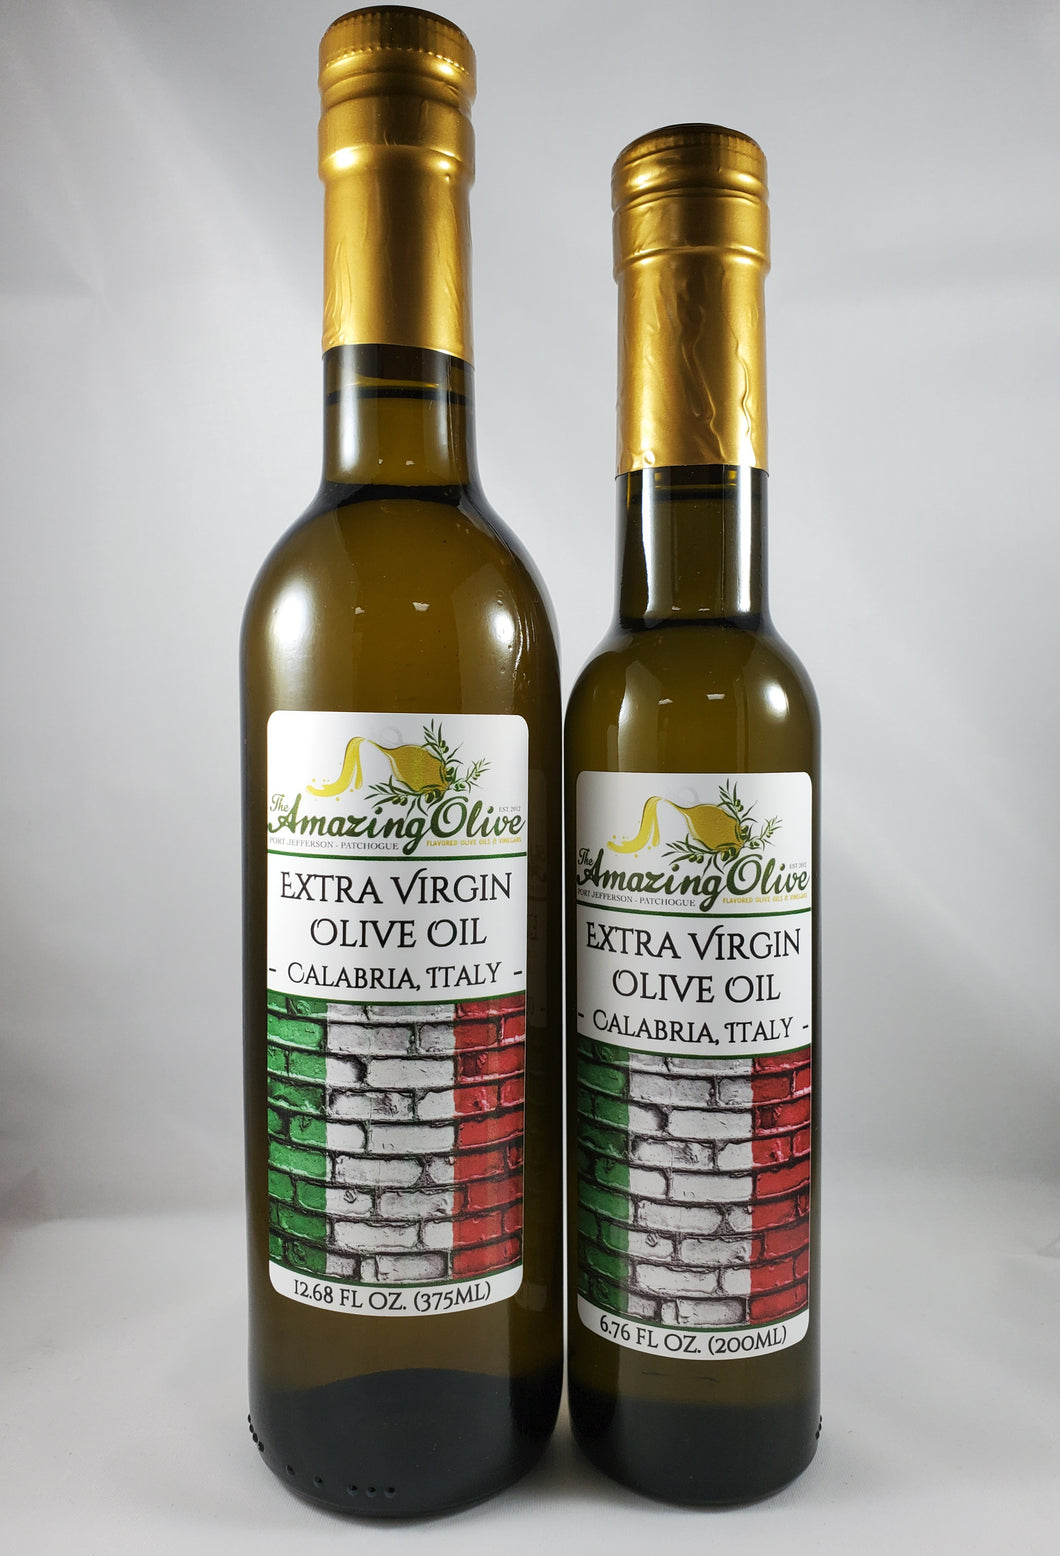 Extra Virgin Olive Oil From Calabria, Italy